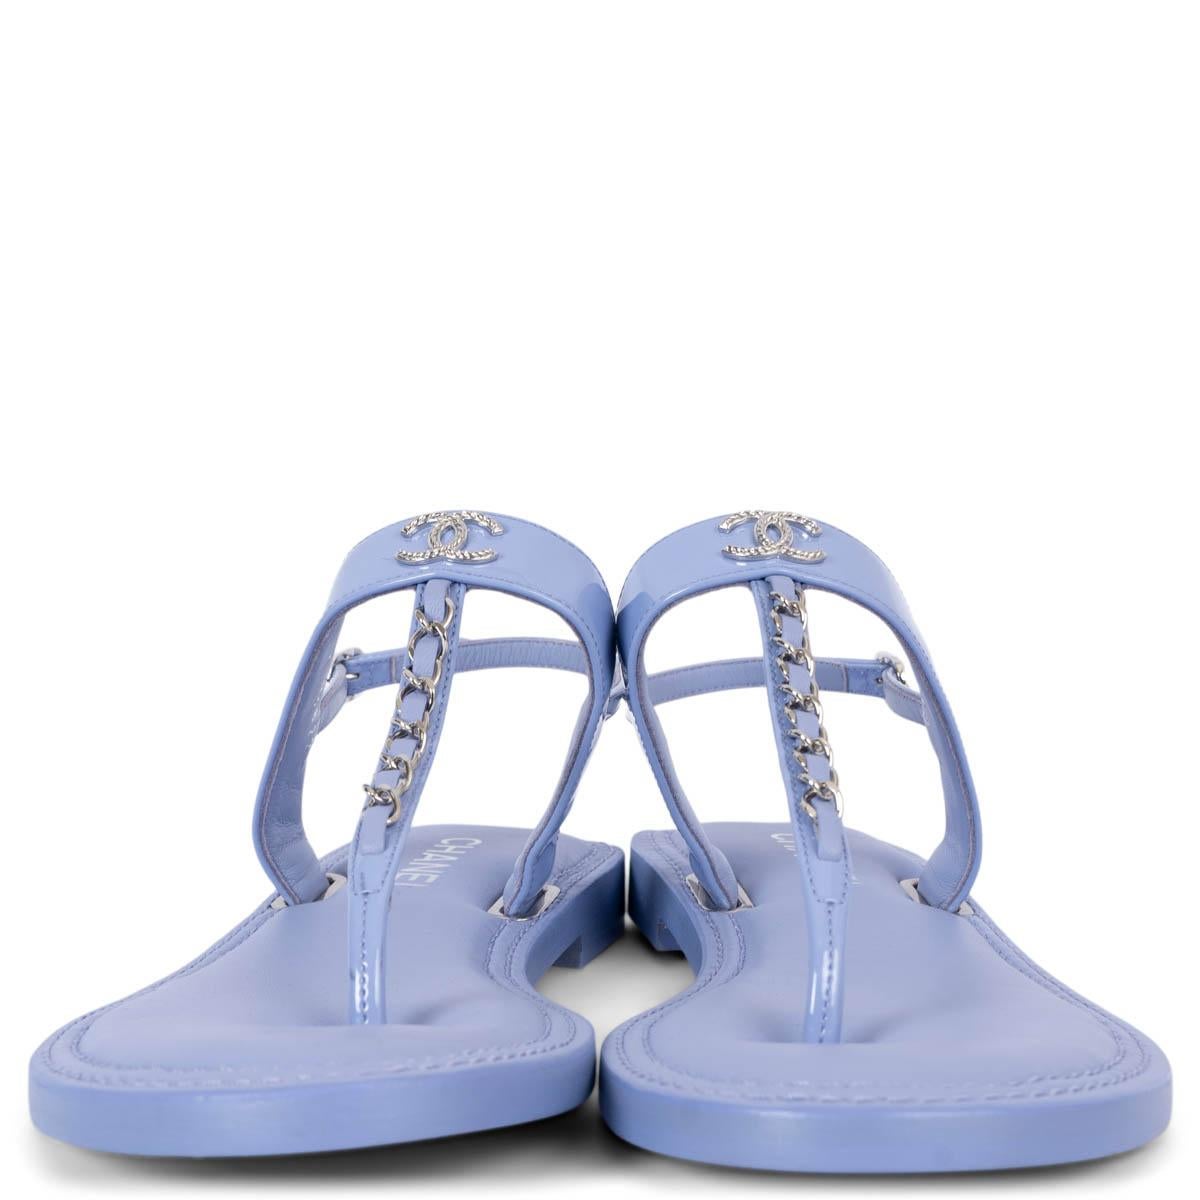 100% authentic Chanel chain trim t-strap thong sandals in lilac patent leather with a padded leather footbed and silver-tone hardware. Brand new. Come with dust bag. 

2022 Paris-Dubai Resort

Measurements
Model	22C G38221 X56375
Imprinted